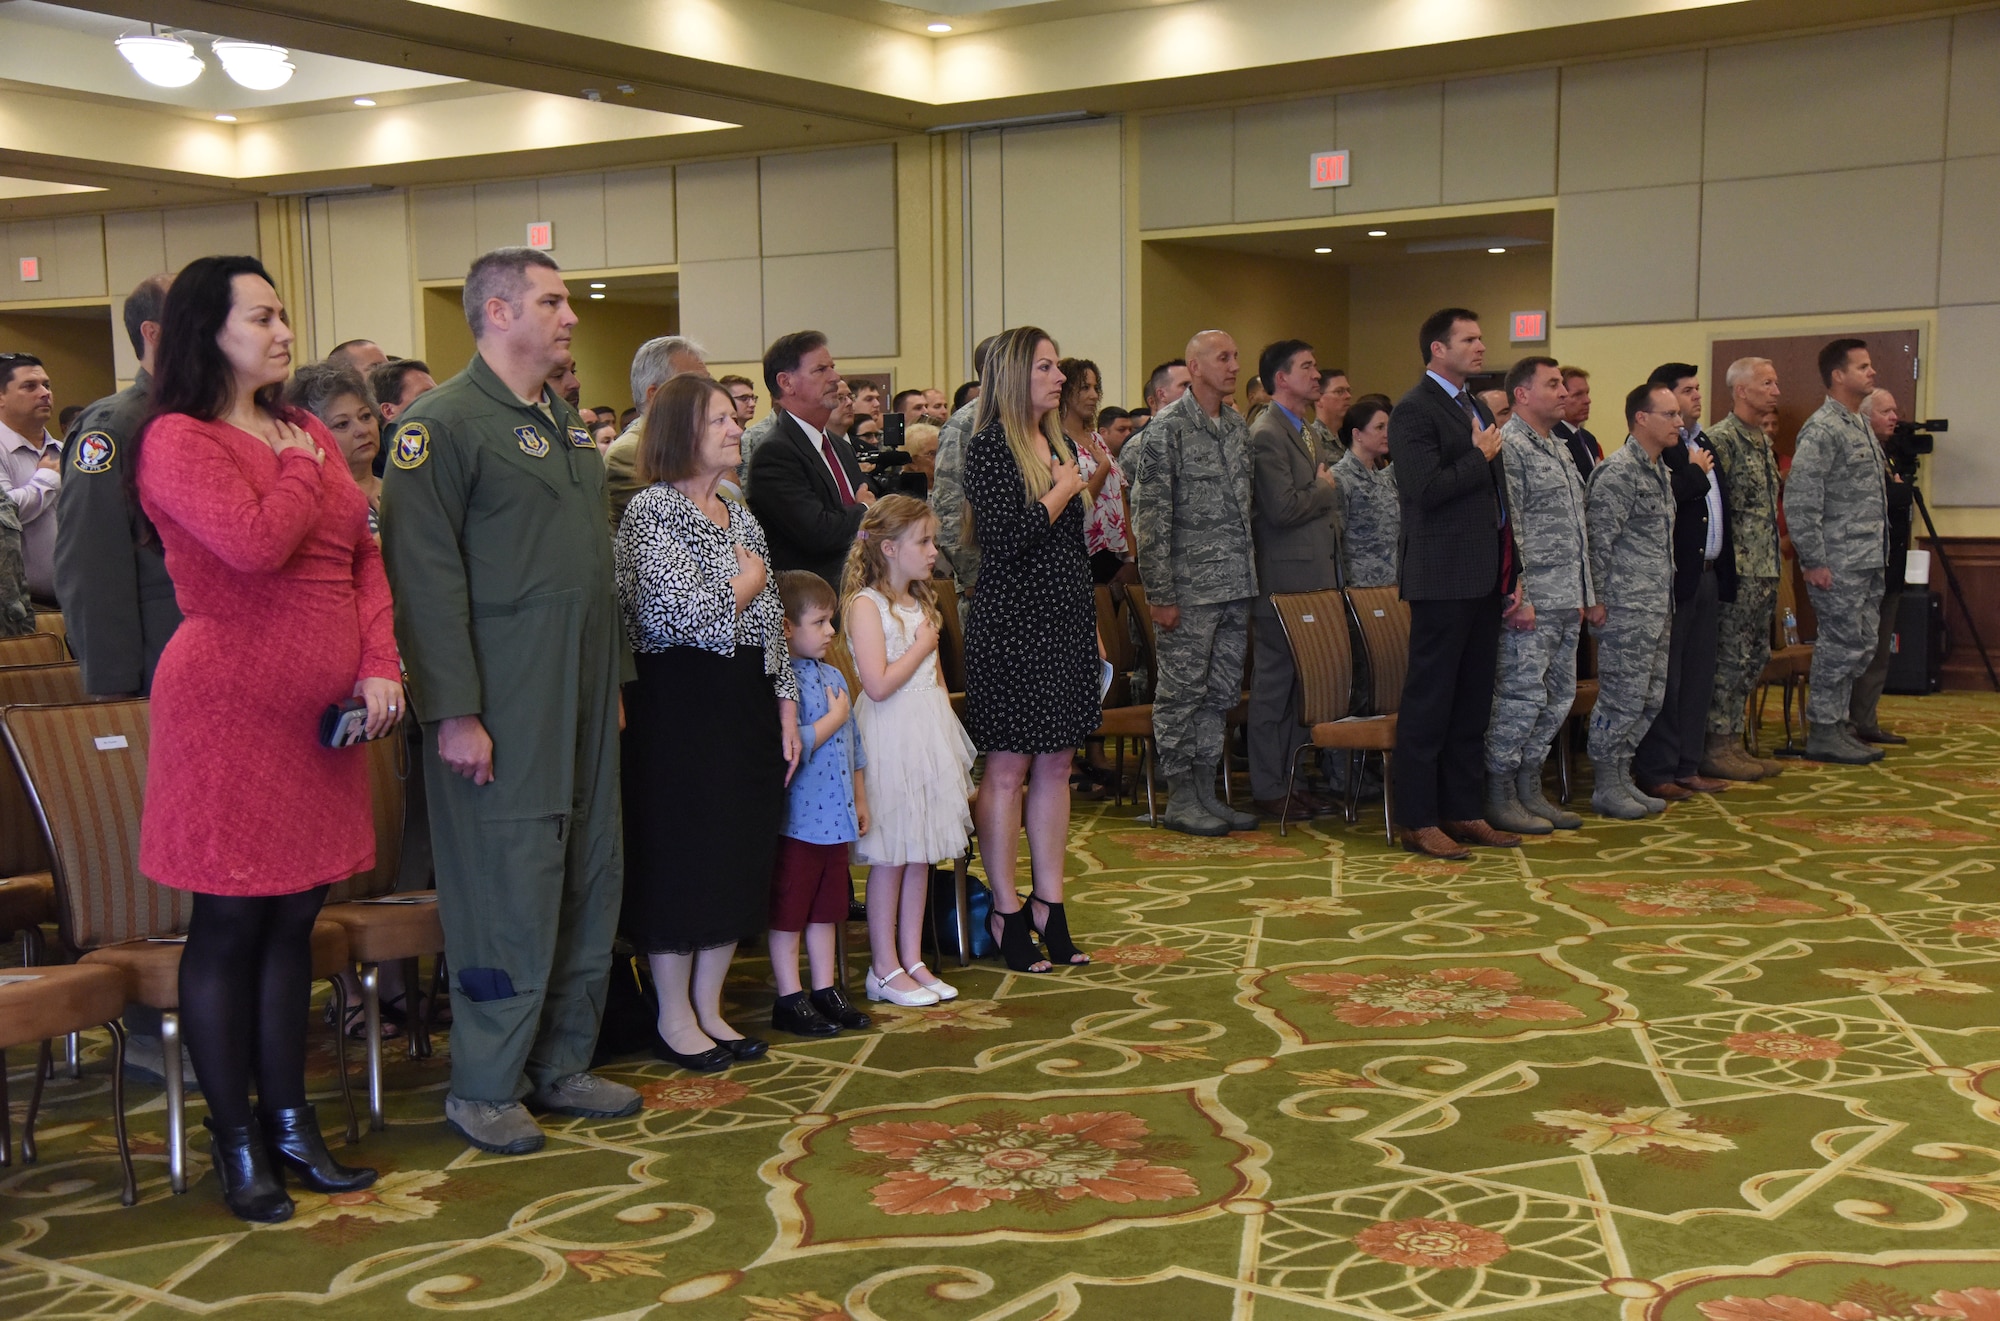 Keesler personnel, families and friends attend the 81st Mission Support Group change of command ceremony in the Bay Breeze Event Center at Keesler Air Force Base, Mississippi, July 19, 2018. U.S. Air Force Col. Marcia Quigley, incoming 81st MSG commander, assumed command from Col. Danny Davis, outgoing 81st MSG commander, with the passing of the guidon. The passing of the guidon is a ceremonial symbol of exchanging command from one commander to another. (U.S. Air Force photo by Kemberly Groue)